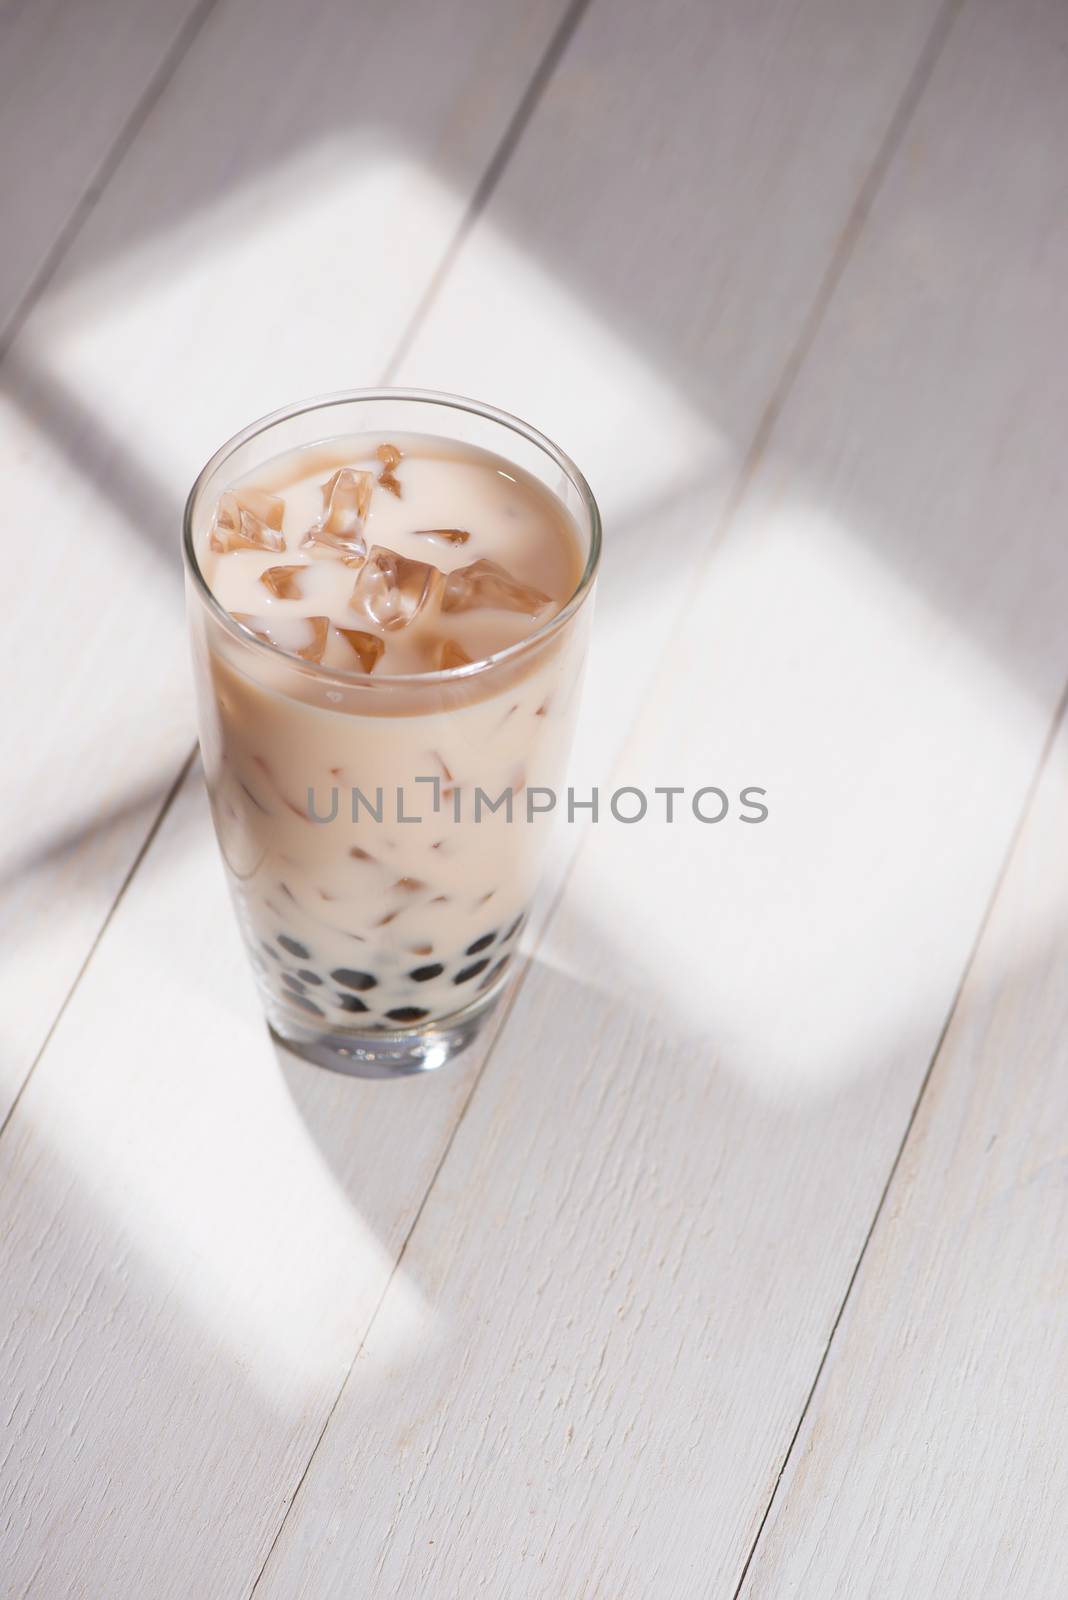 Boba / Bubble tea. Homemade Taro Milk Tea with Pearls on wooden  by makidotvn